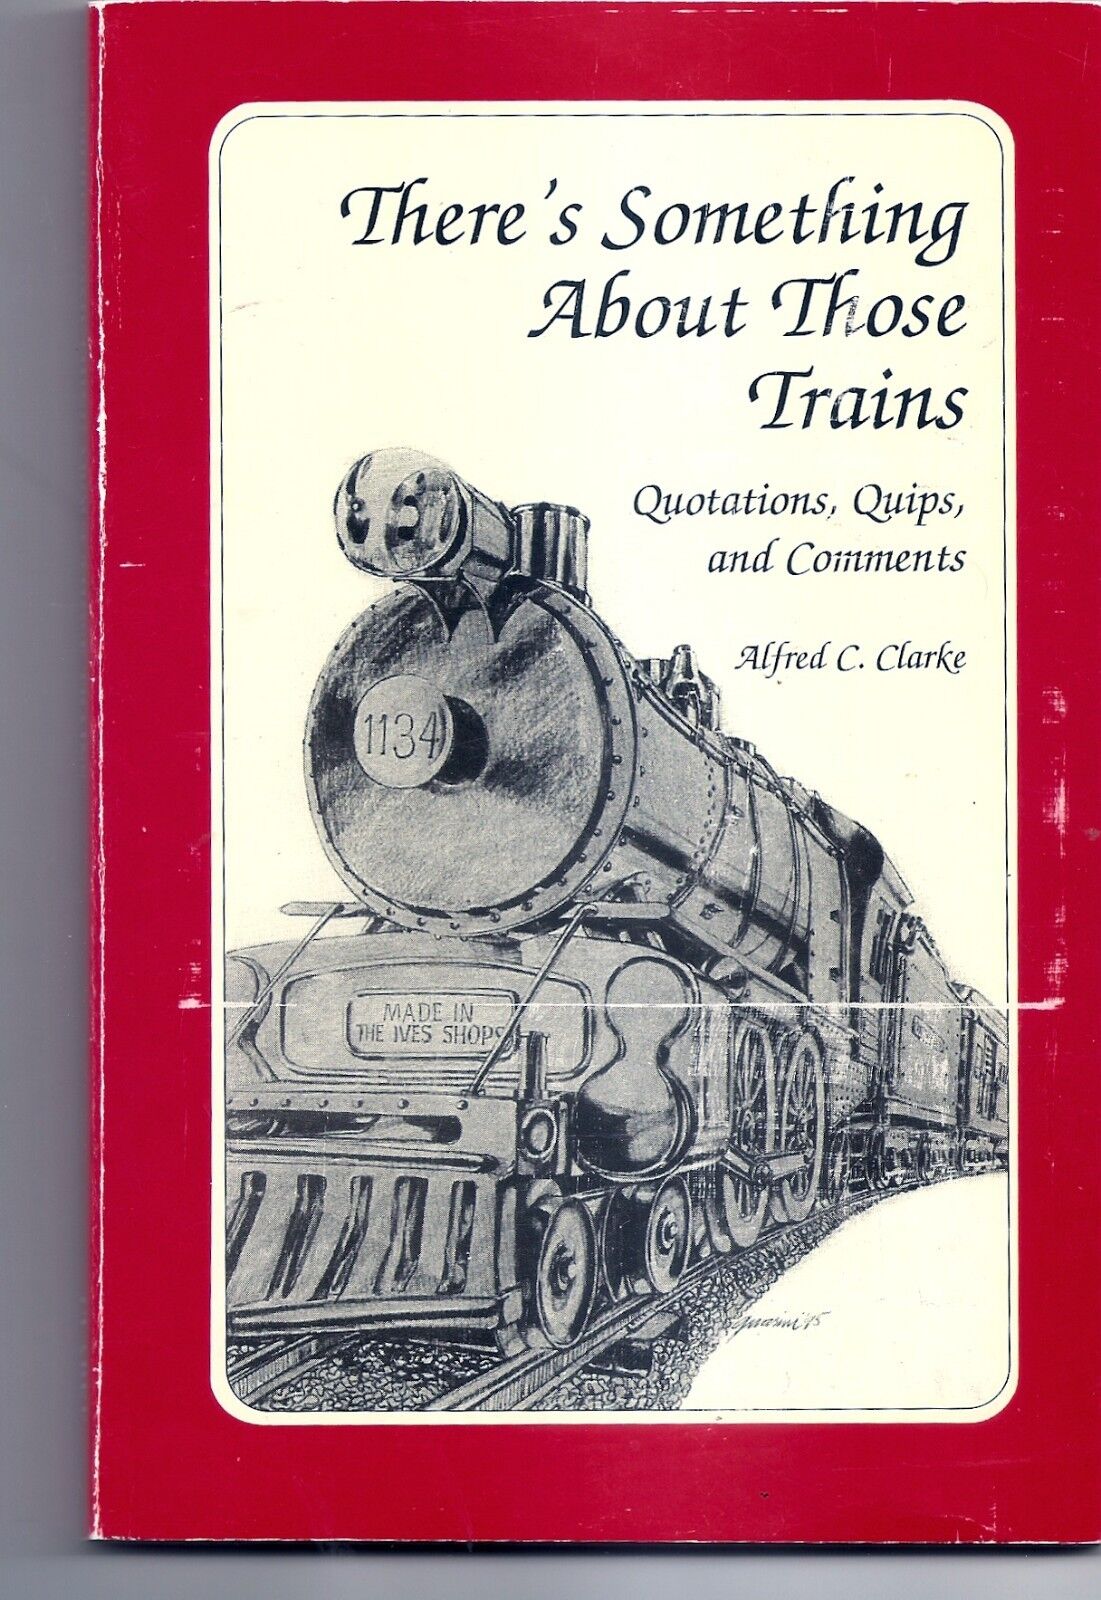 THERE\'S SOMETHING ABOUT THOSE TRAINS - Quotes, Quips Comments by Alfred Clarke